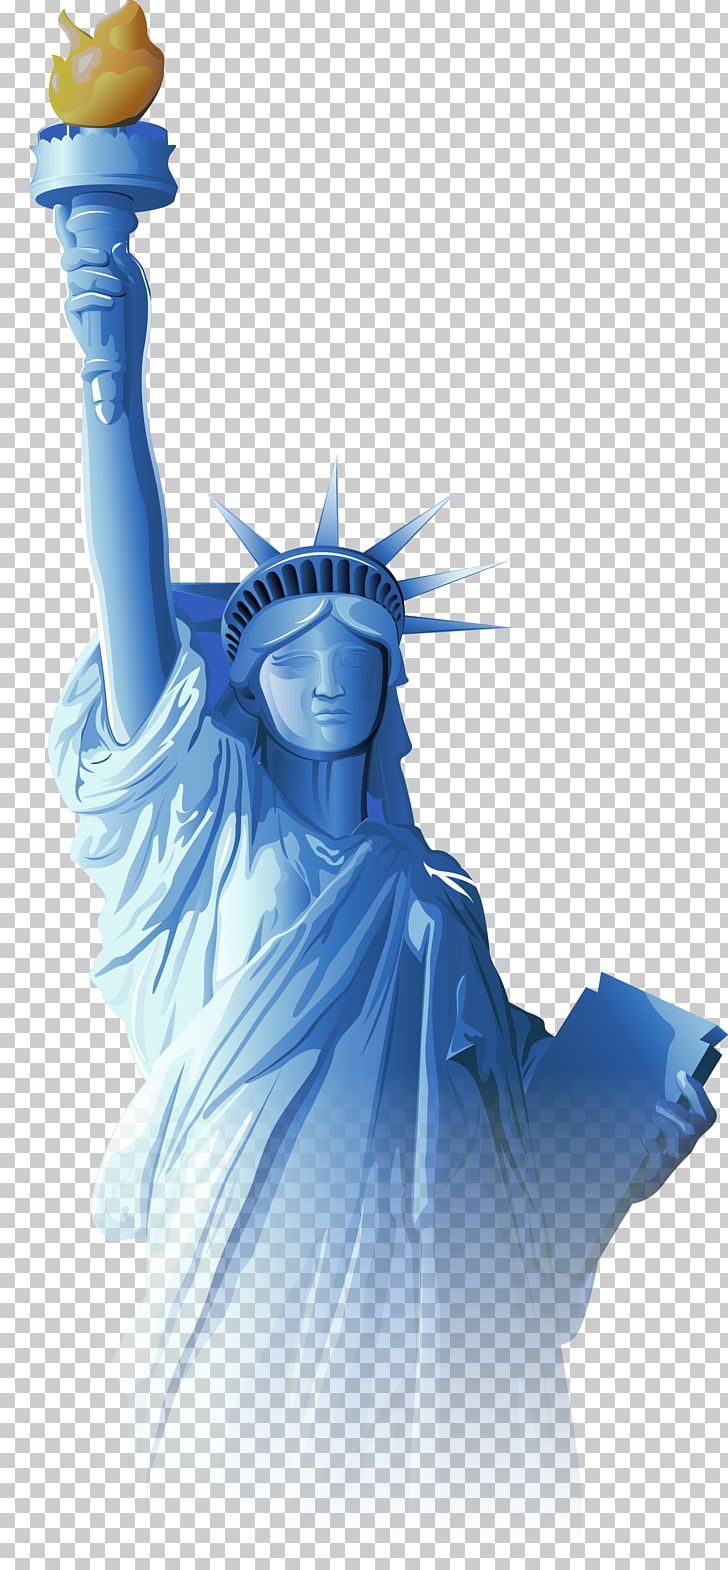 Statue Of Liberty PNG, Clipart, Statue Of Liberty Free PNG Download